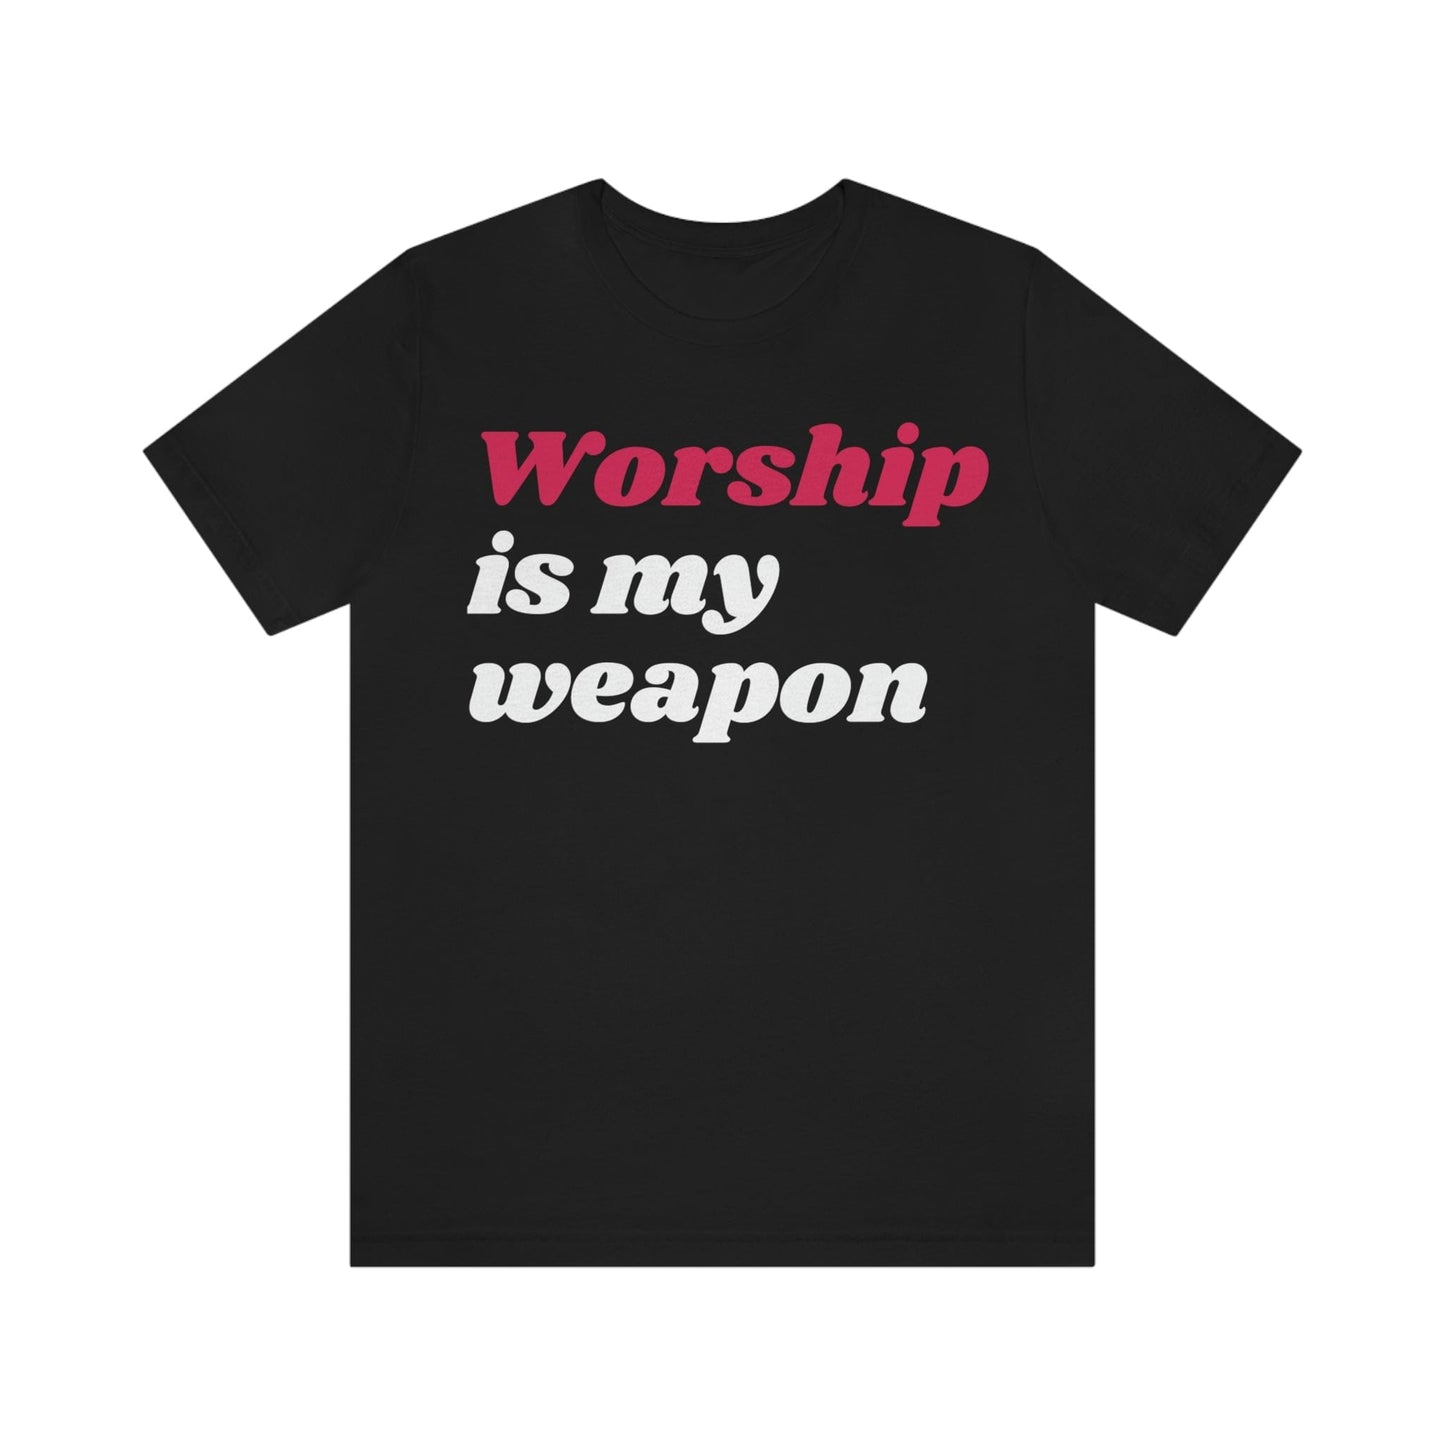 Worship Is My Weapon (Graphic Fuchsia & White Text) Unisex Jersey Short Sleeve Tee - Style: Bella+Canvas 3001